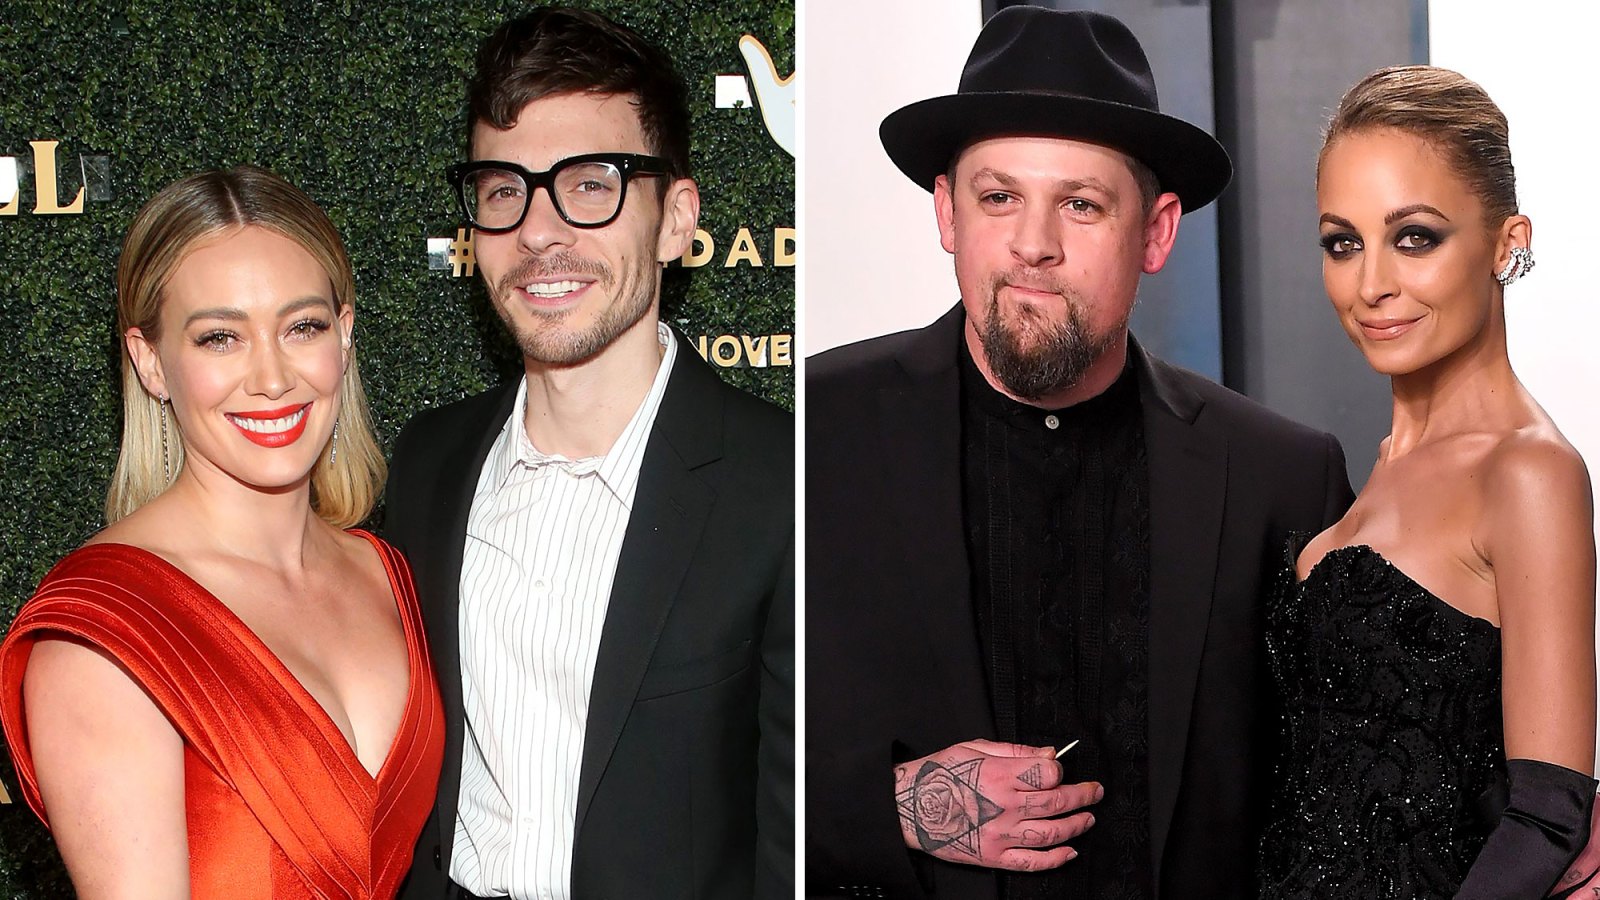 Hilary Duff Enjoys a Group Date Night With Ex Joel Madden and His Wife Nicole Richie